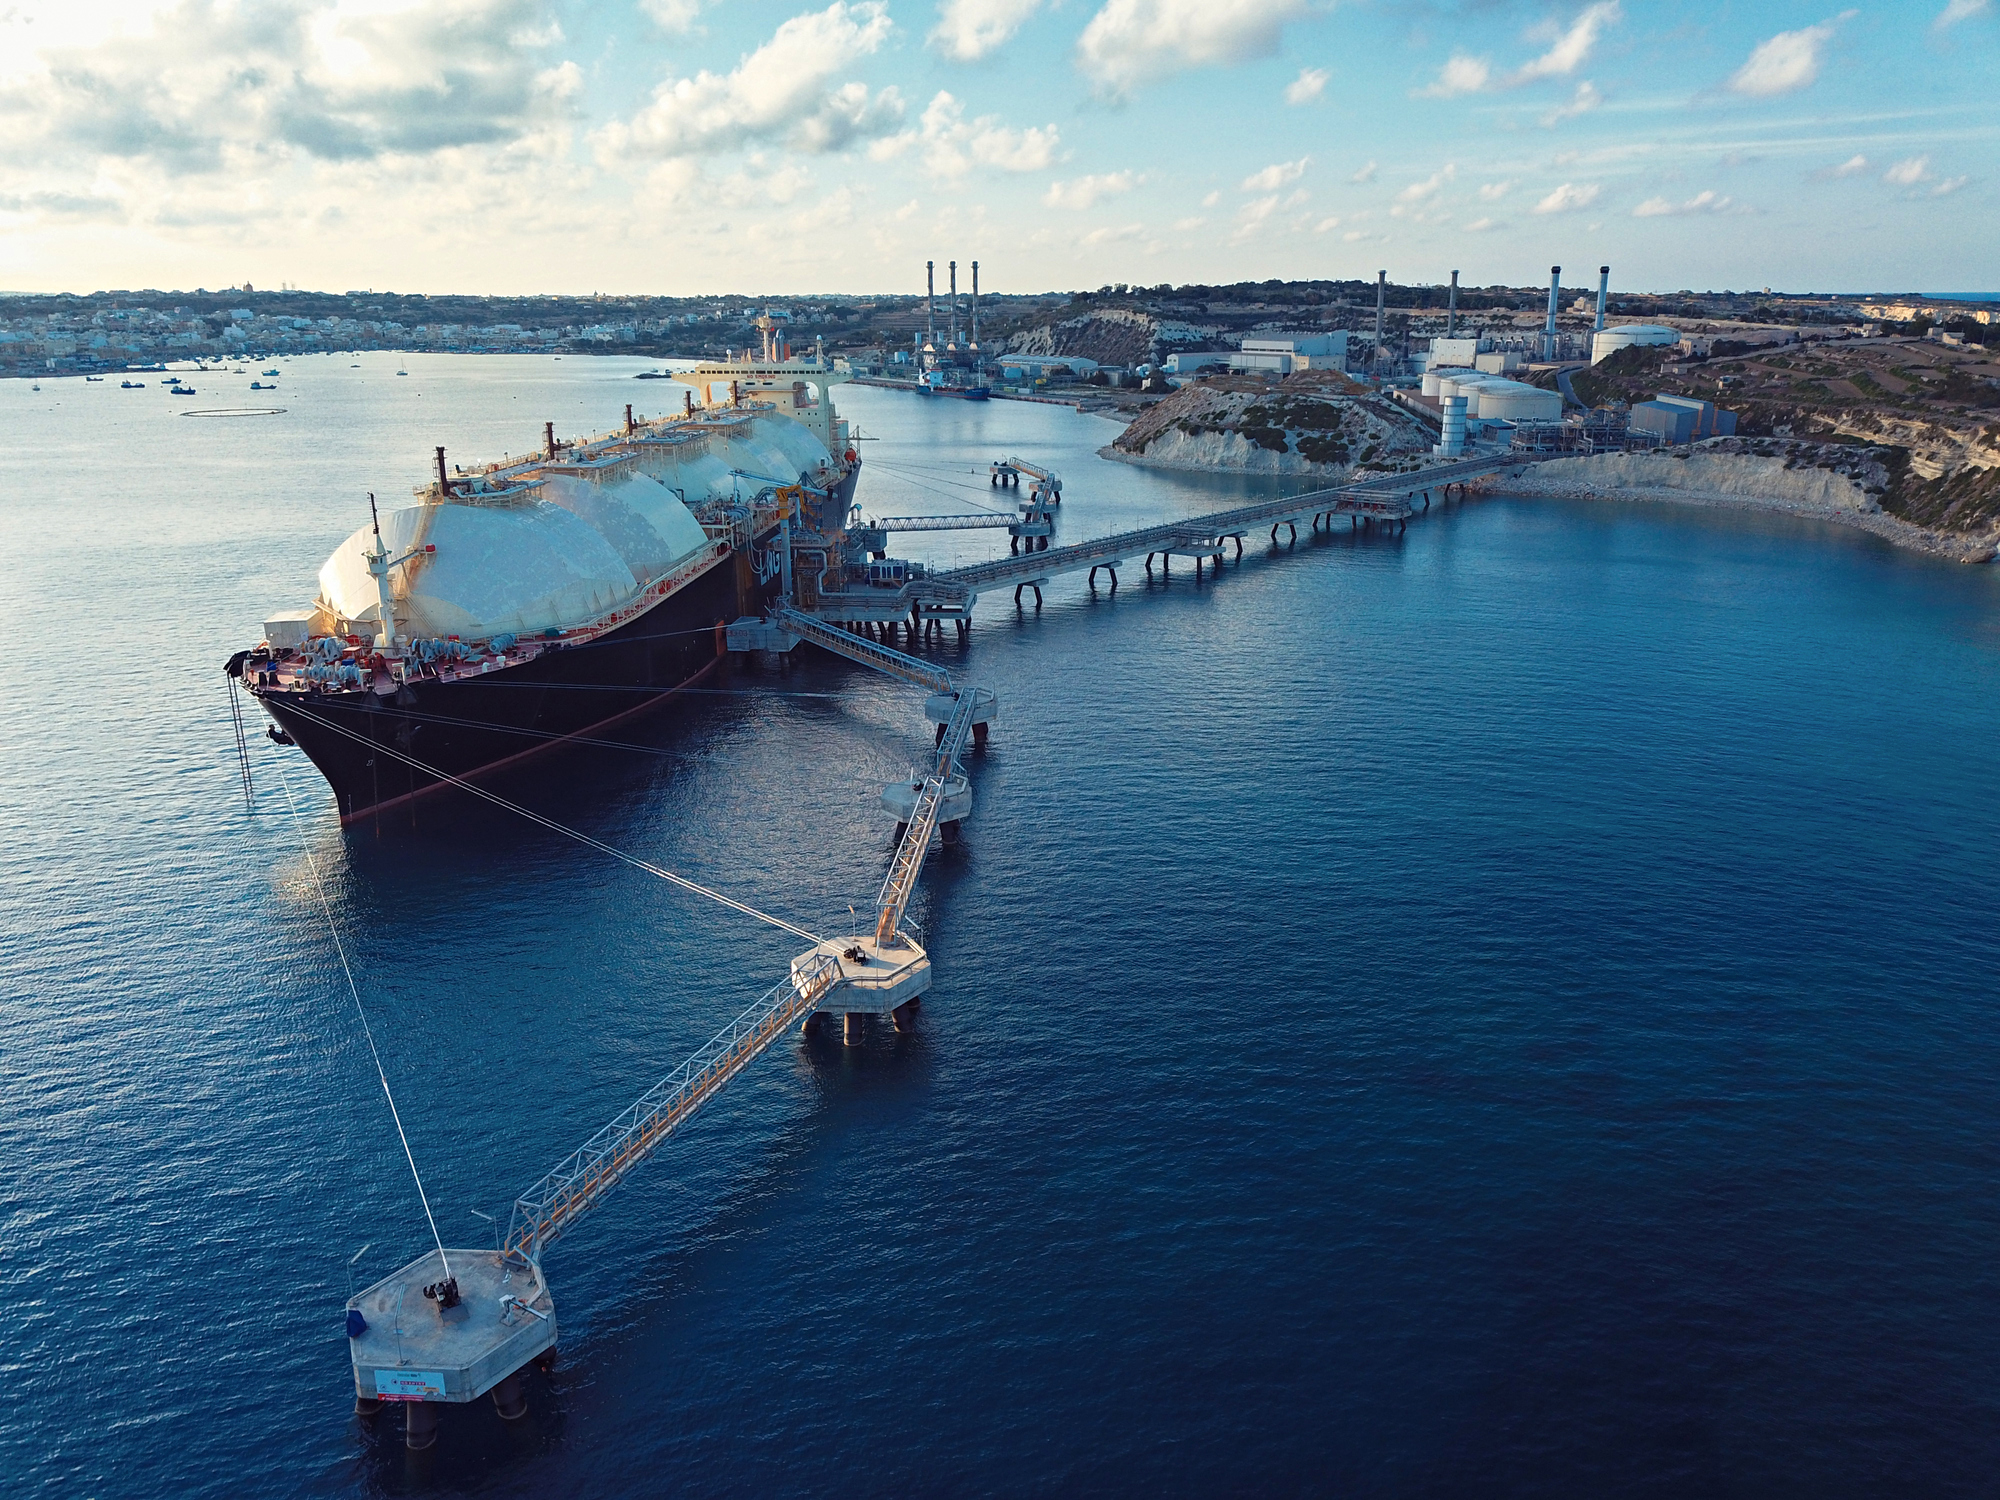 Aerial View Of A Liquefied Natural Gas (LNG) Tanker Moored To The Jetty